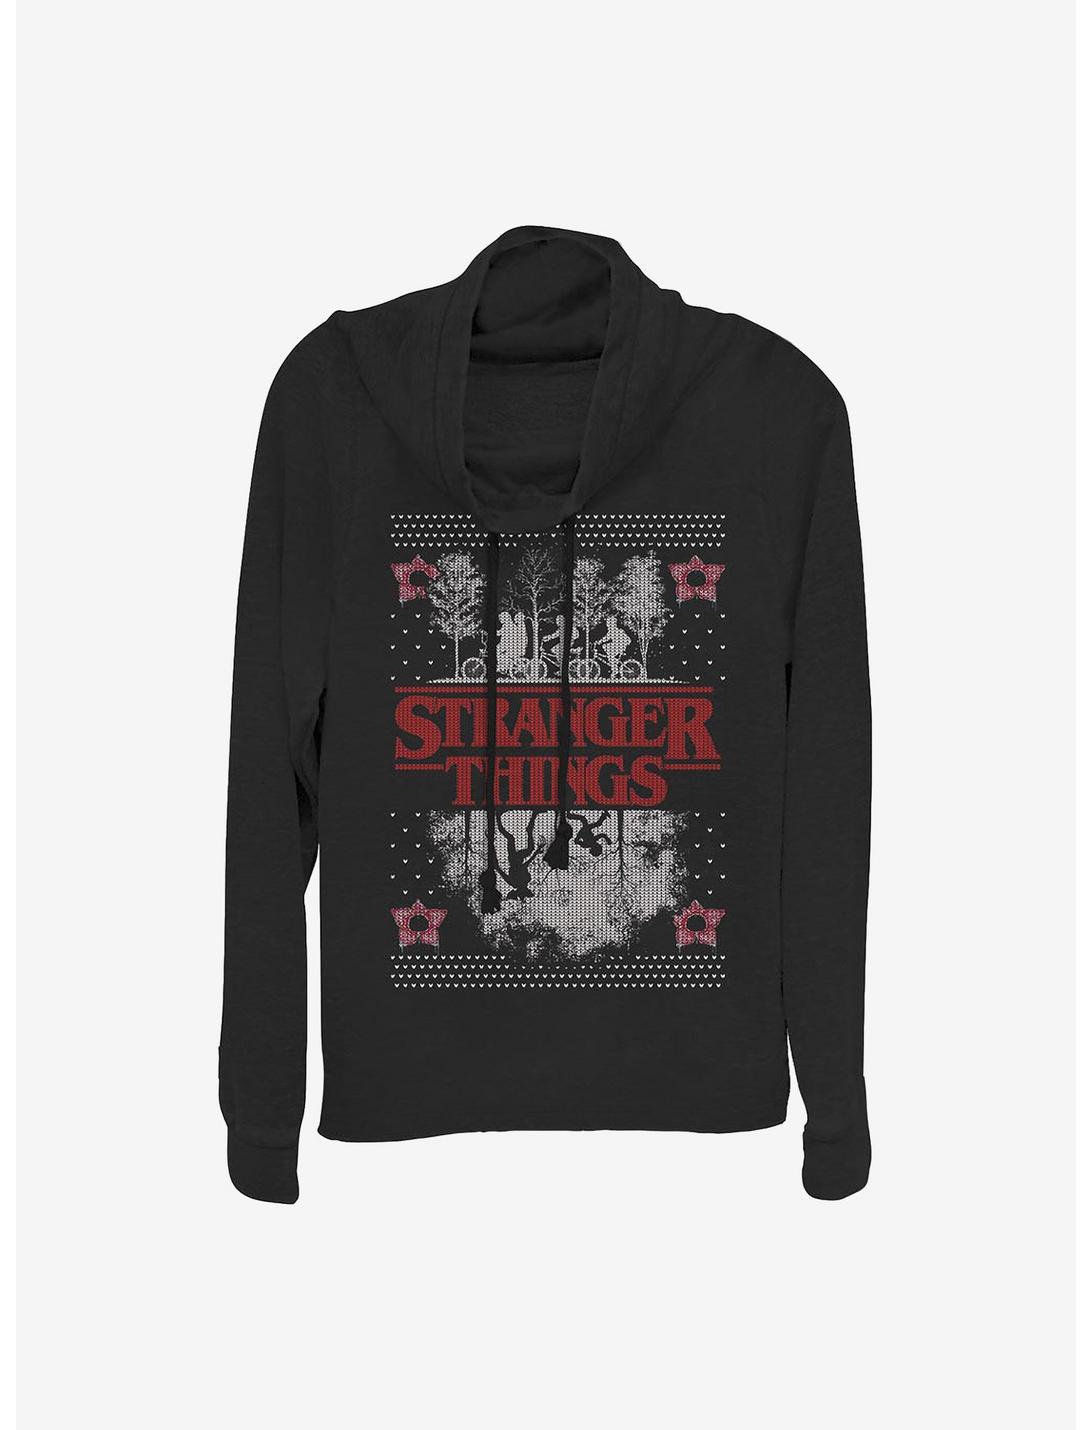 Stranger Things Upside Down Ugly Sweater Cowl Neck Long-Sleeve Womens Top, BLACK, hi-res